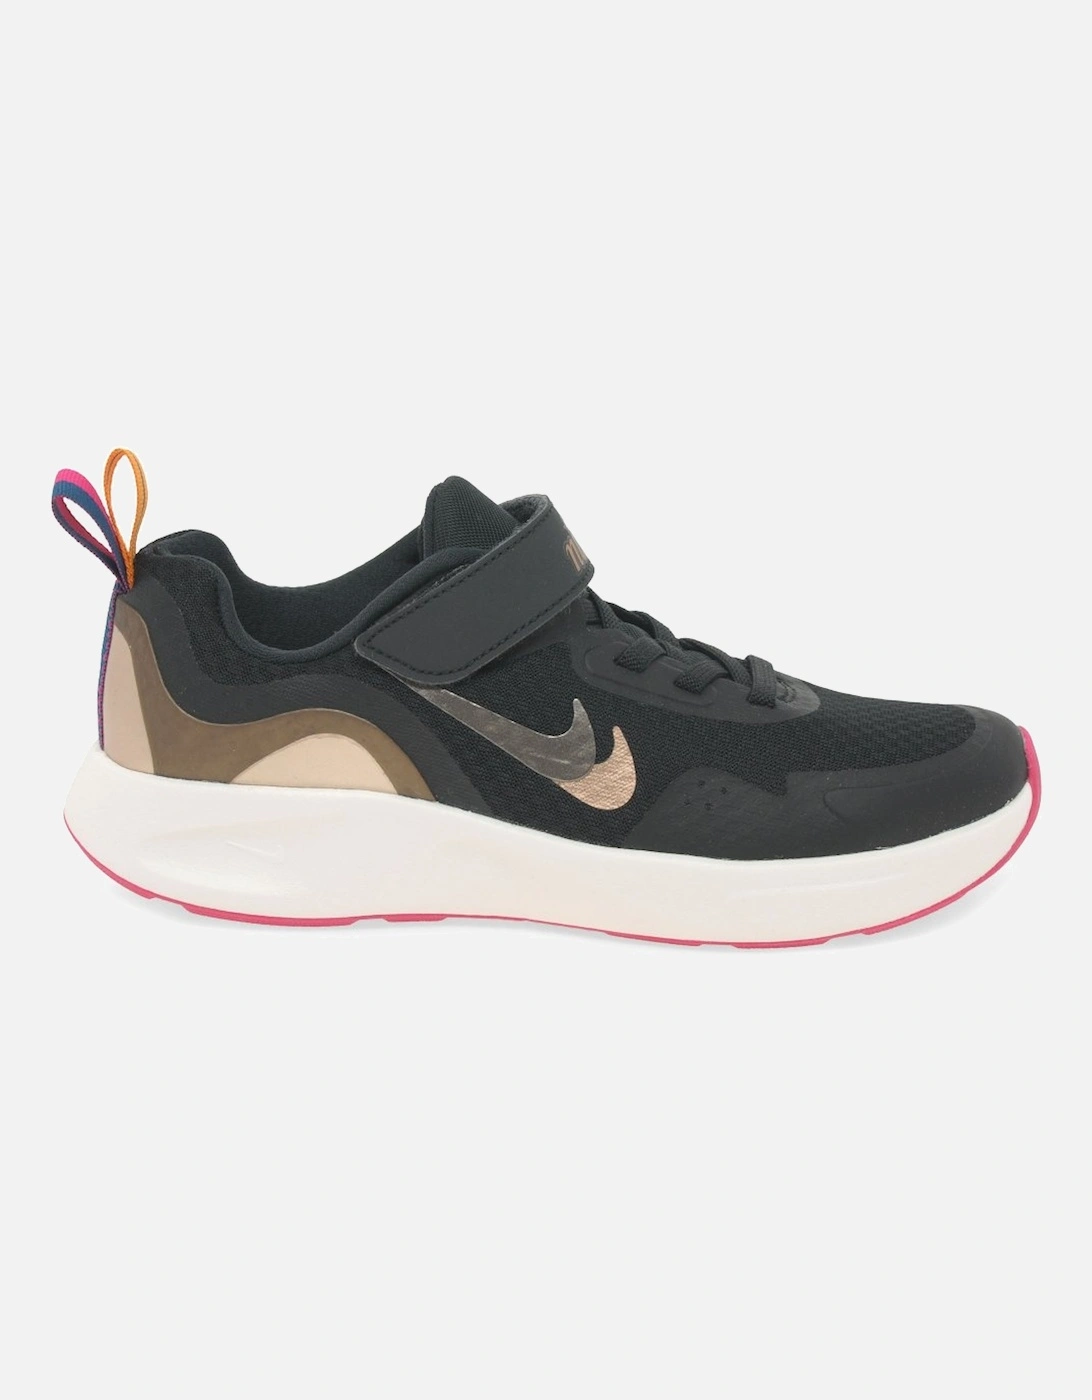 Wearallday Prem Girls Youth Sports Trainers